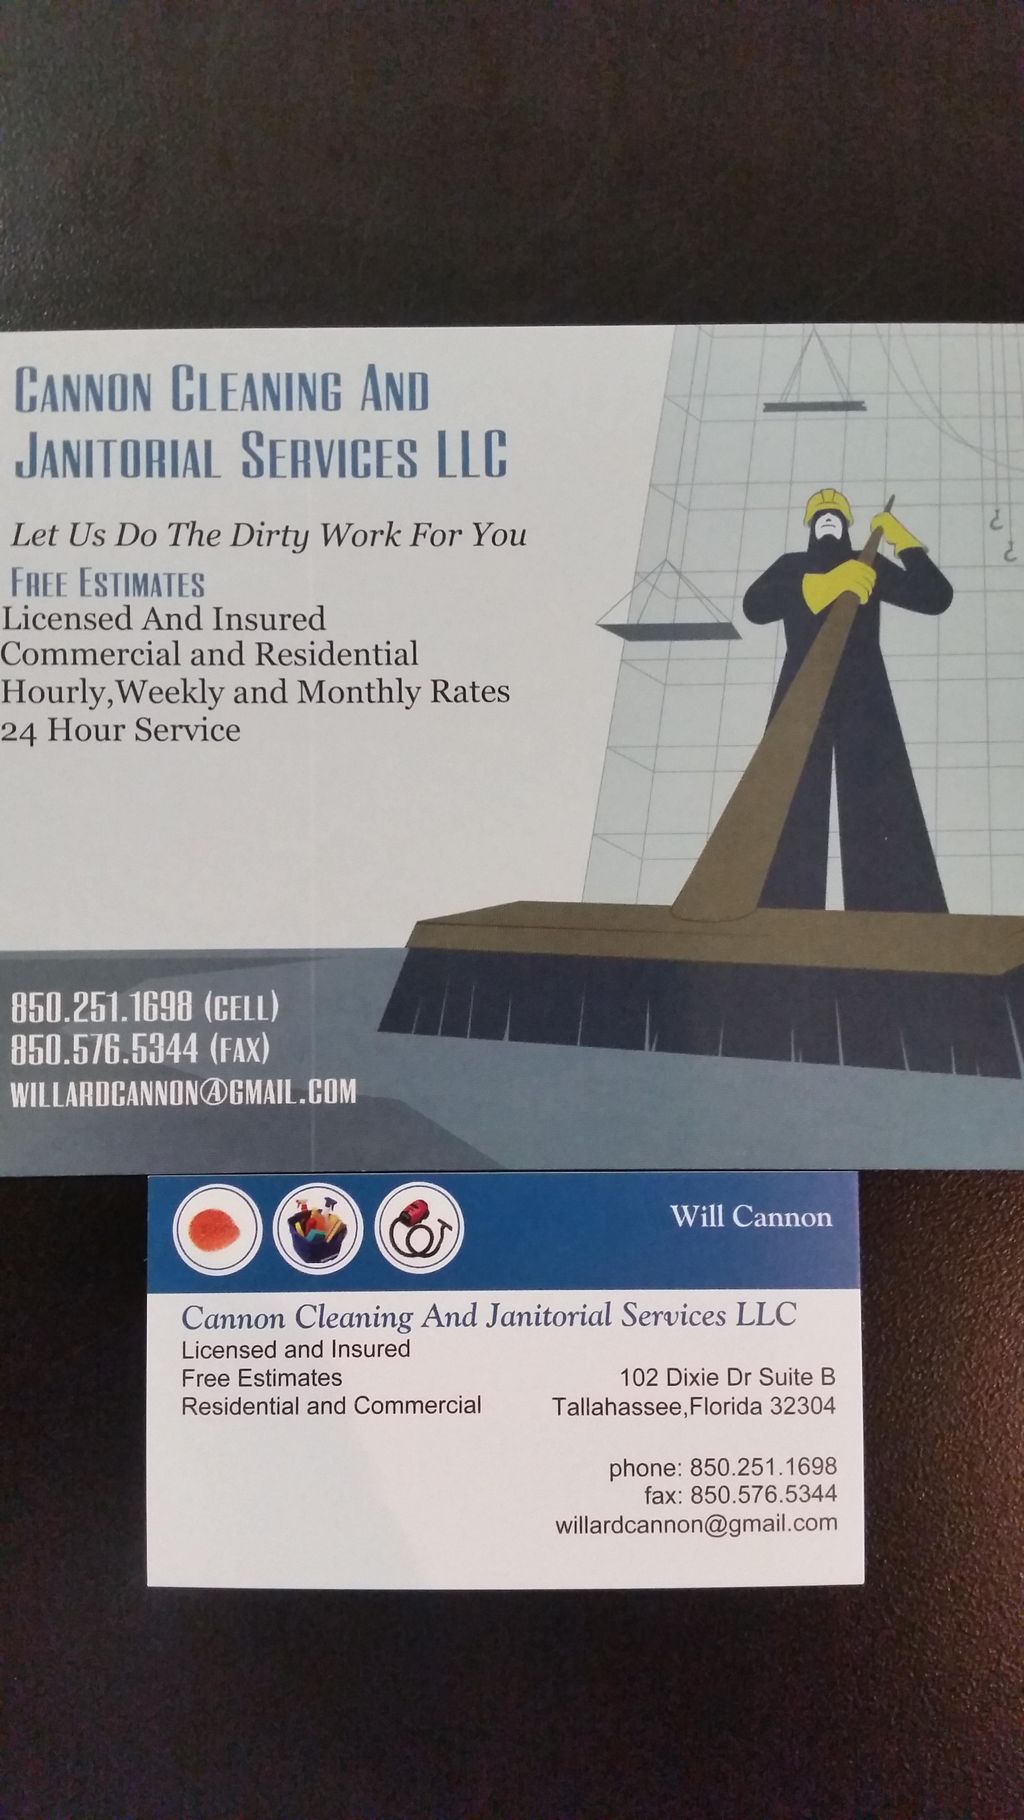 Cannon Cleaning And Janitorial Services LLC